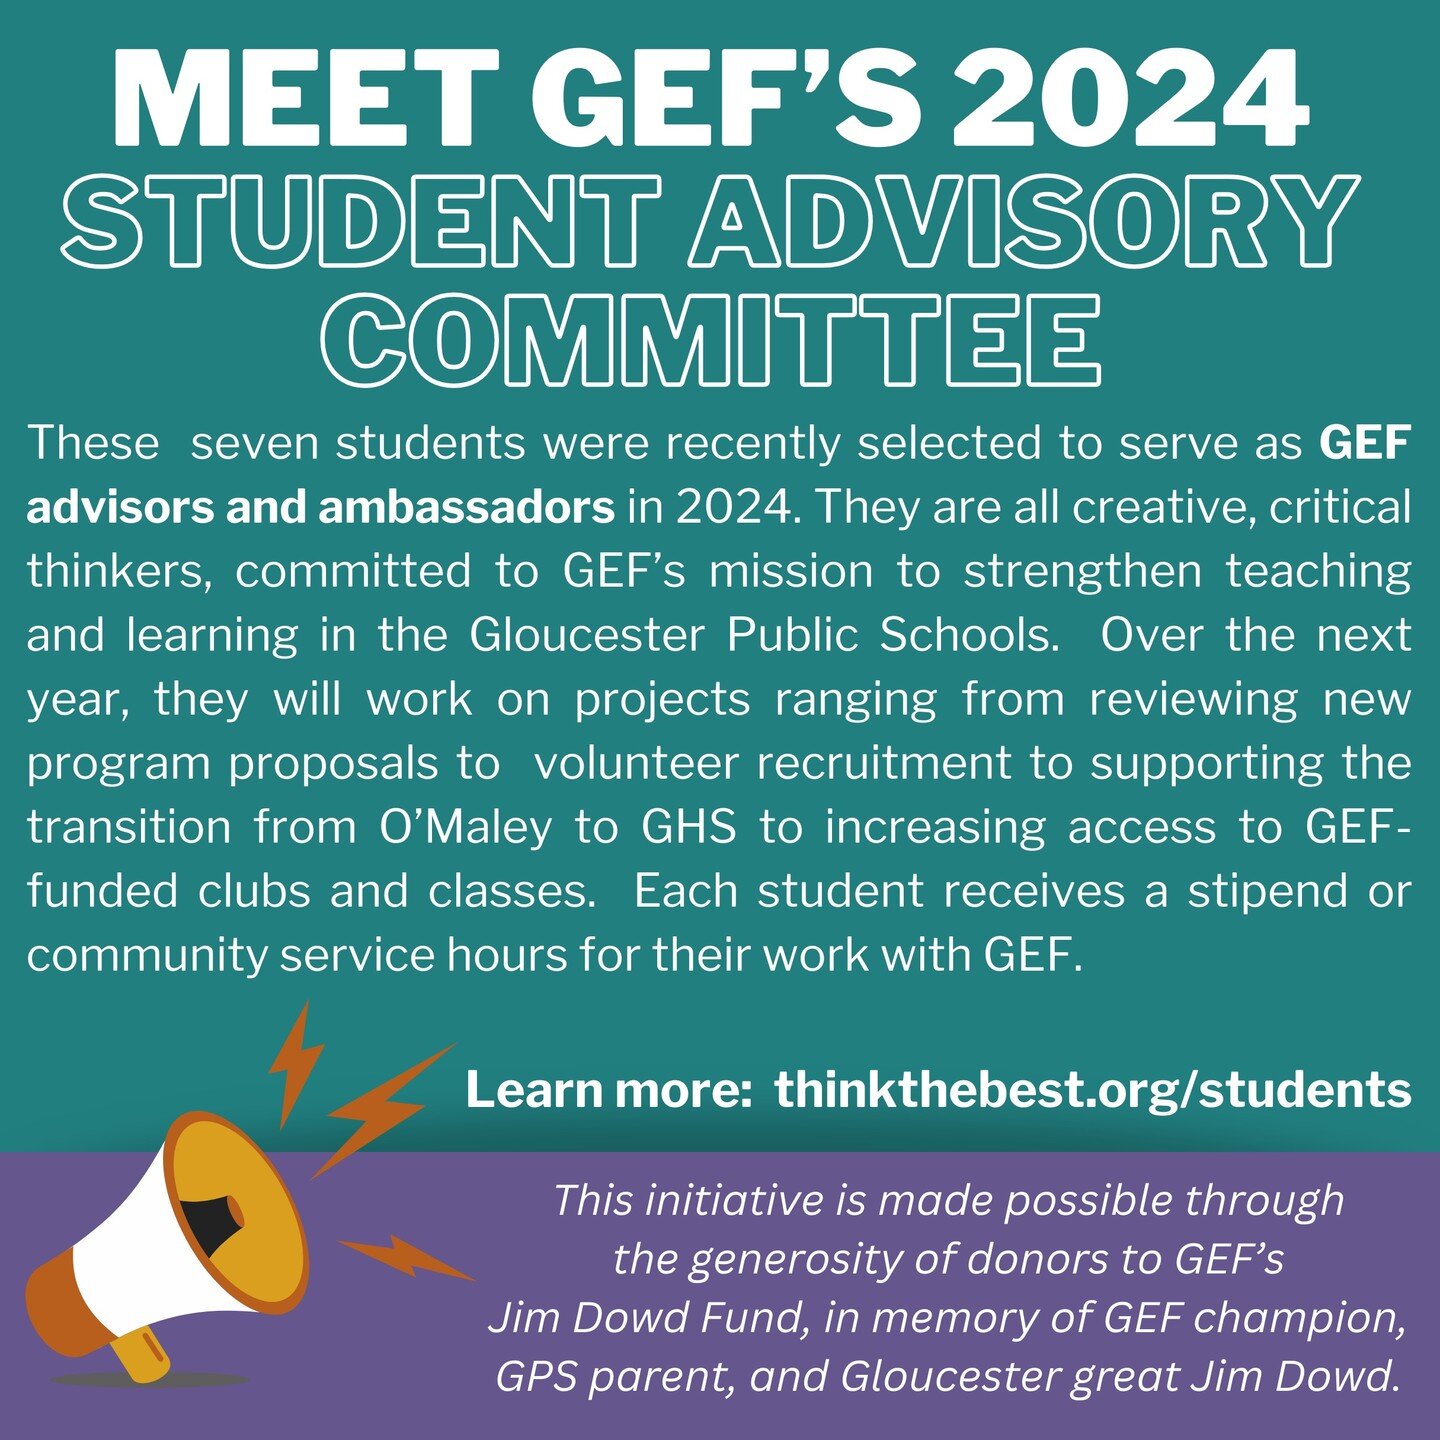 Meet the 2nd cohort of GEF Student Advisors! We are thrilled to welcome 6 wonderful new GHS students, who join returning advisor Hannah (our other Cohort 1 advisors all graduated in 2023 - we miss you!). These newbies are already diving into their wo